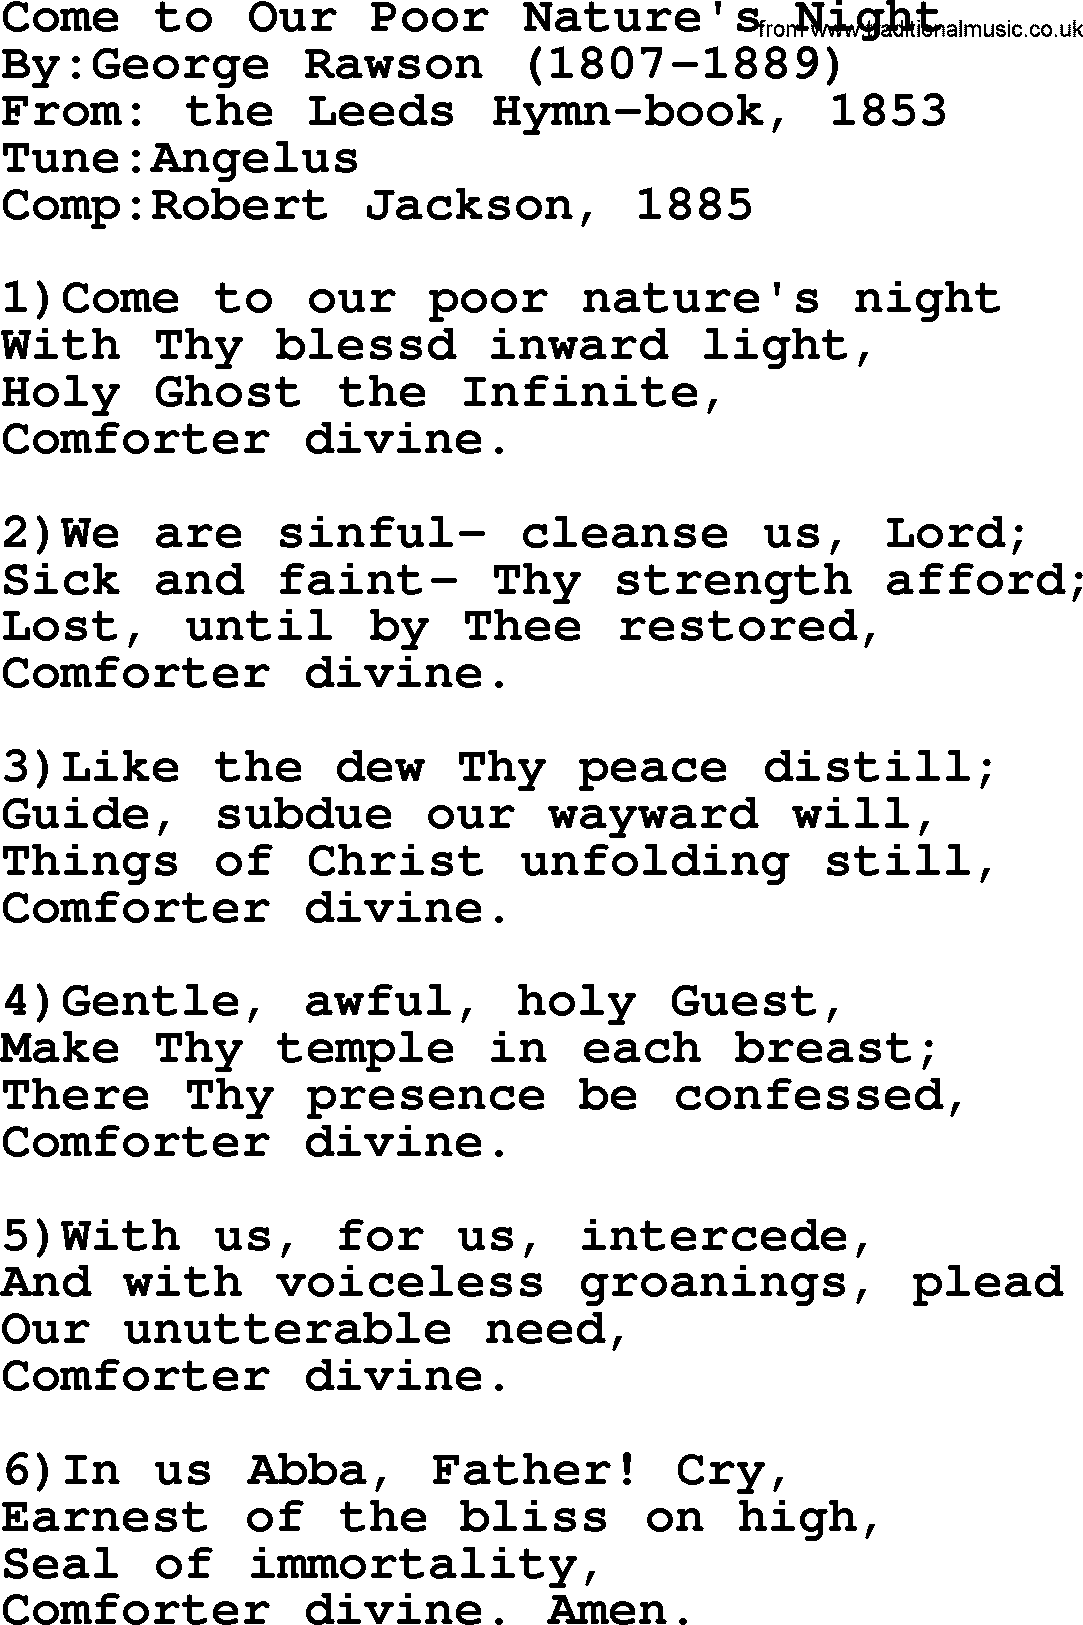 Methodist Hymn: Come To Our Poor Nature's Night, lyrics